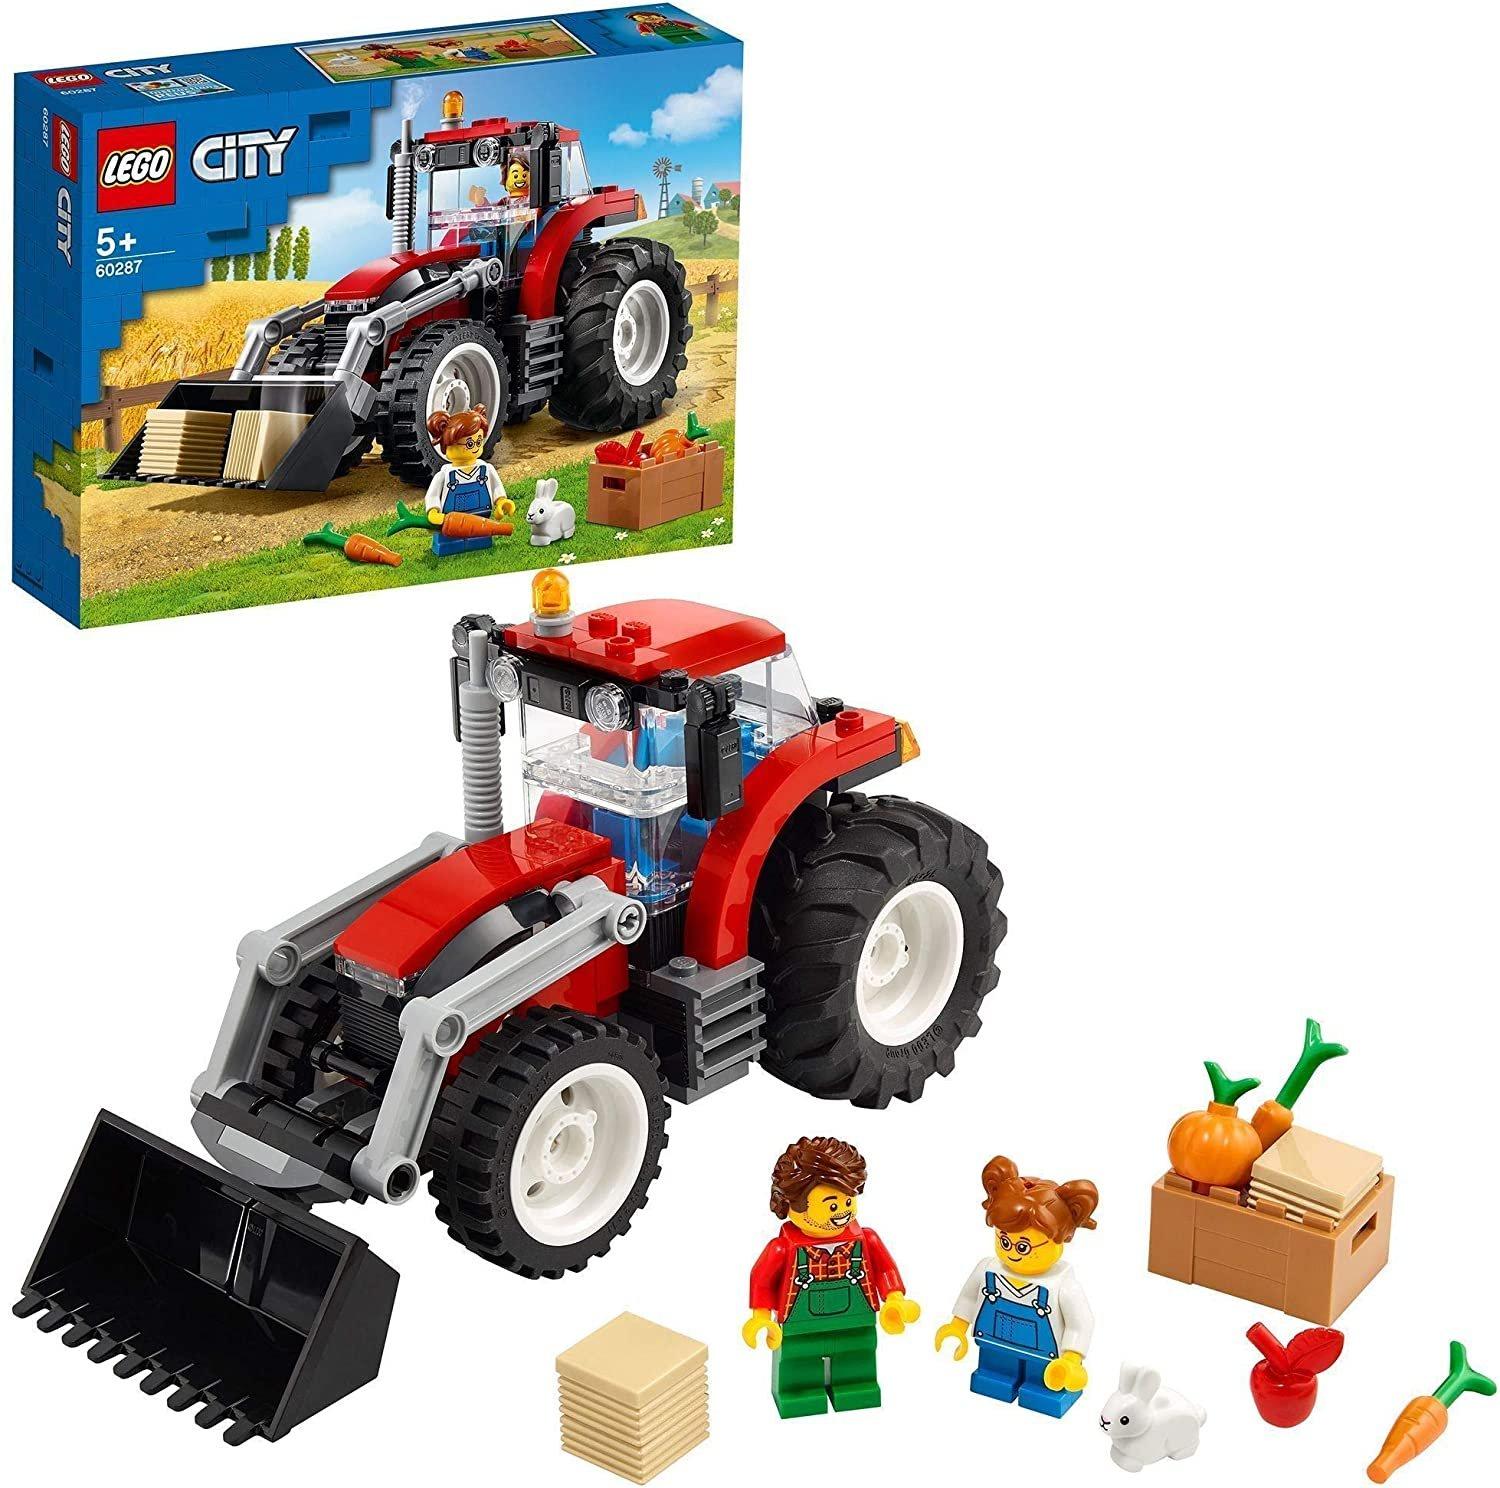 60287 City Great Vehicles Tractor